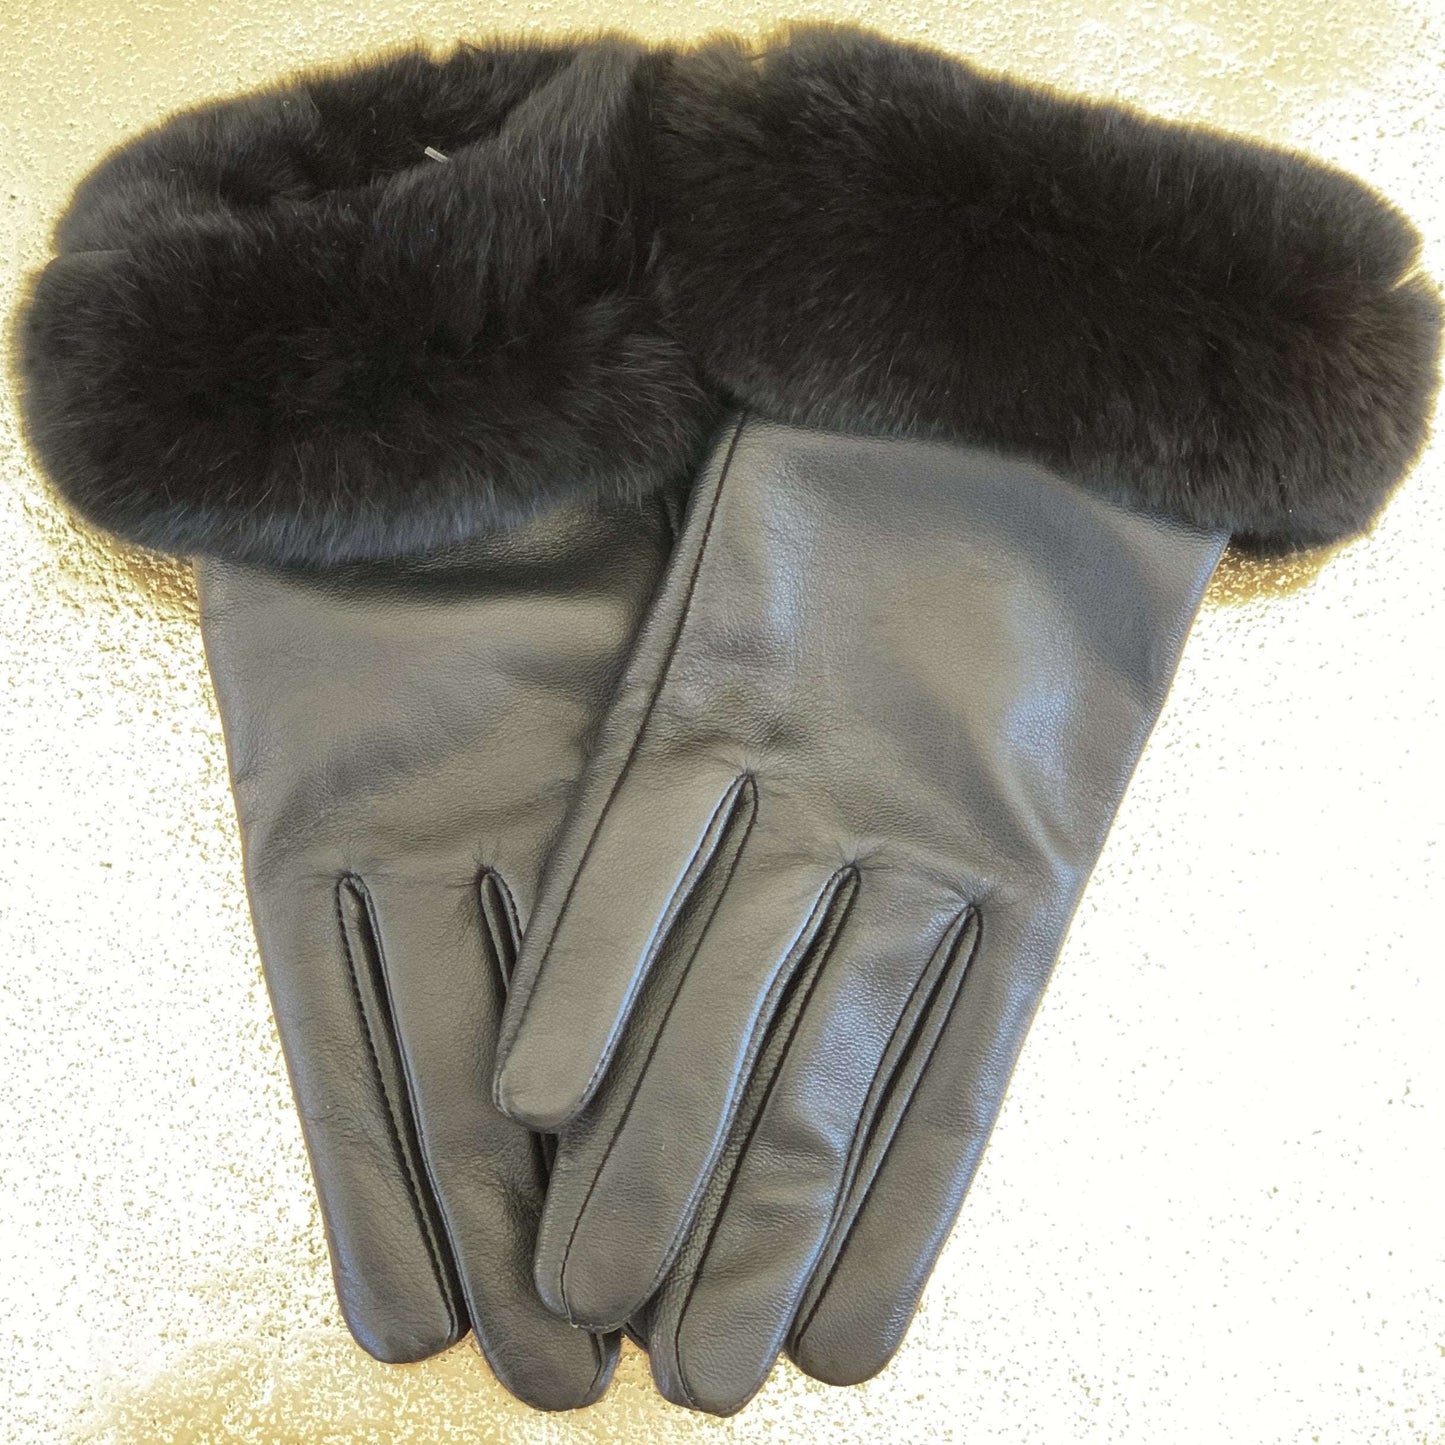 [HISO - 210608 - Black Leather with Black Fur], [ACCESSORIES], [HISO], [Plum Bottom].